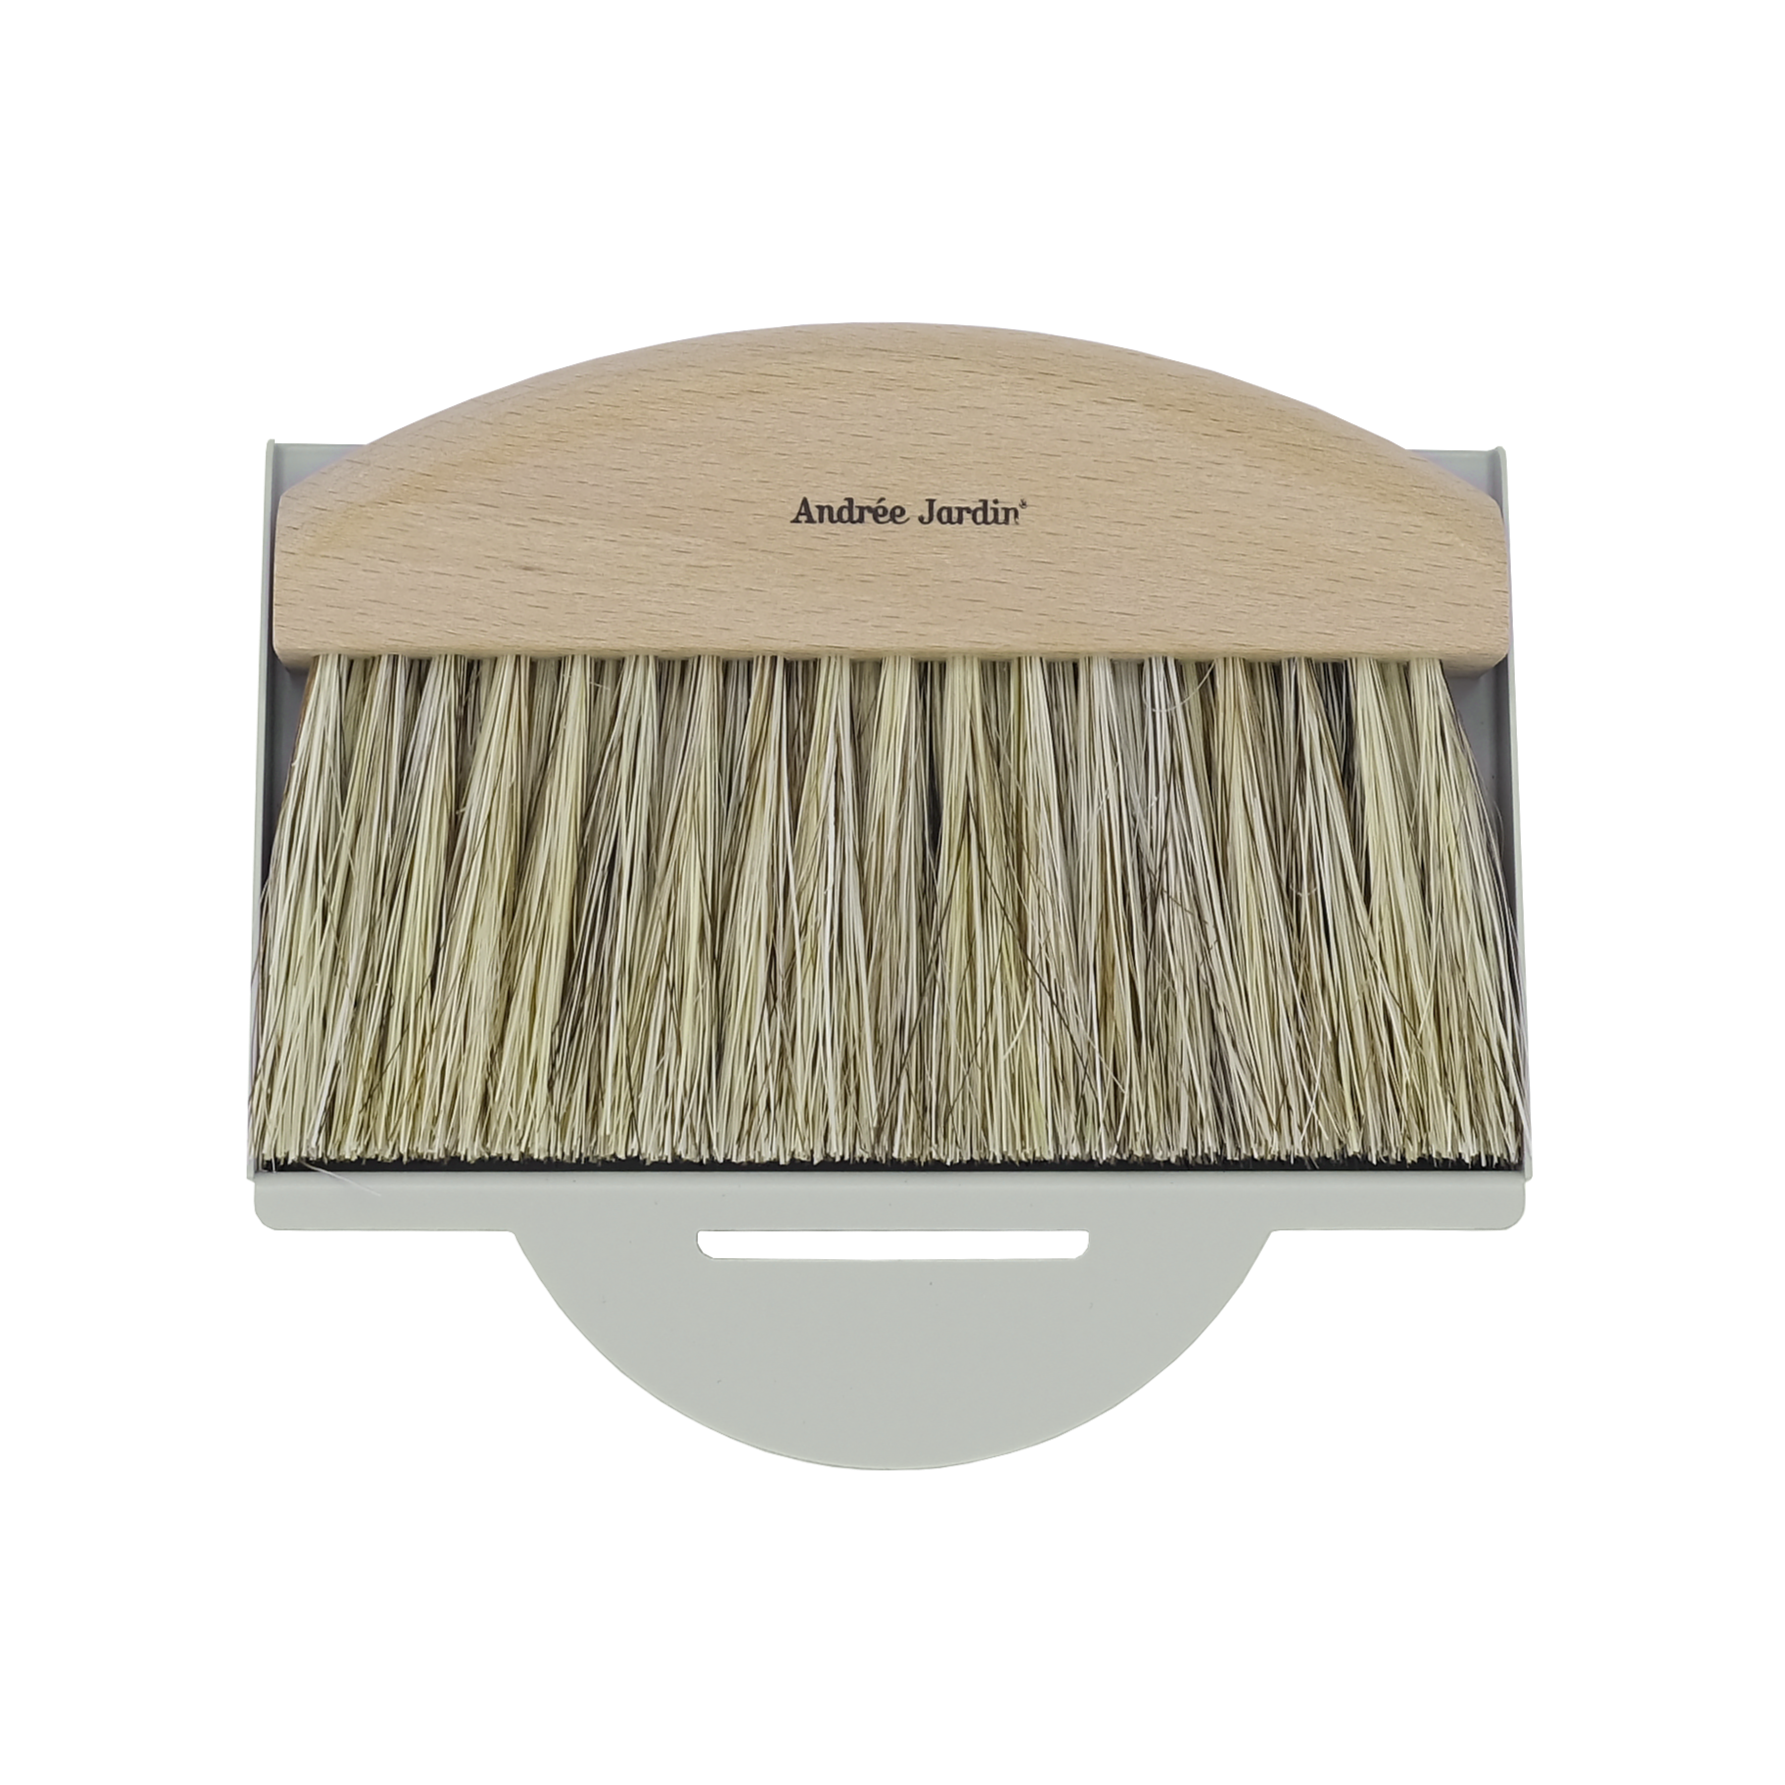 Andrée Jardin Mr. and Mrs. Clynk Natural Table Brush and Dustpan Set Grey Utilities Andrée Jardin Back in stock Brand_Andrée Jardin Home_Broom Sets Home_Household Cleaning New Arrivals 3104_f2716e87-f6f0-49ac-91b5-0e158c141e65